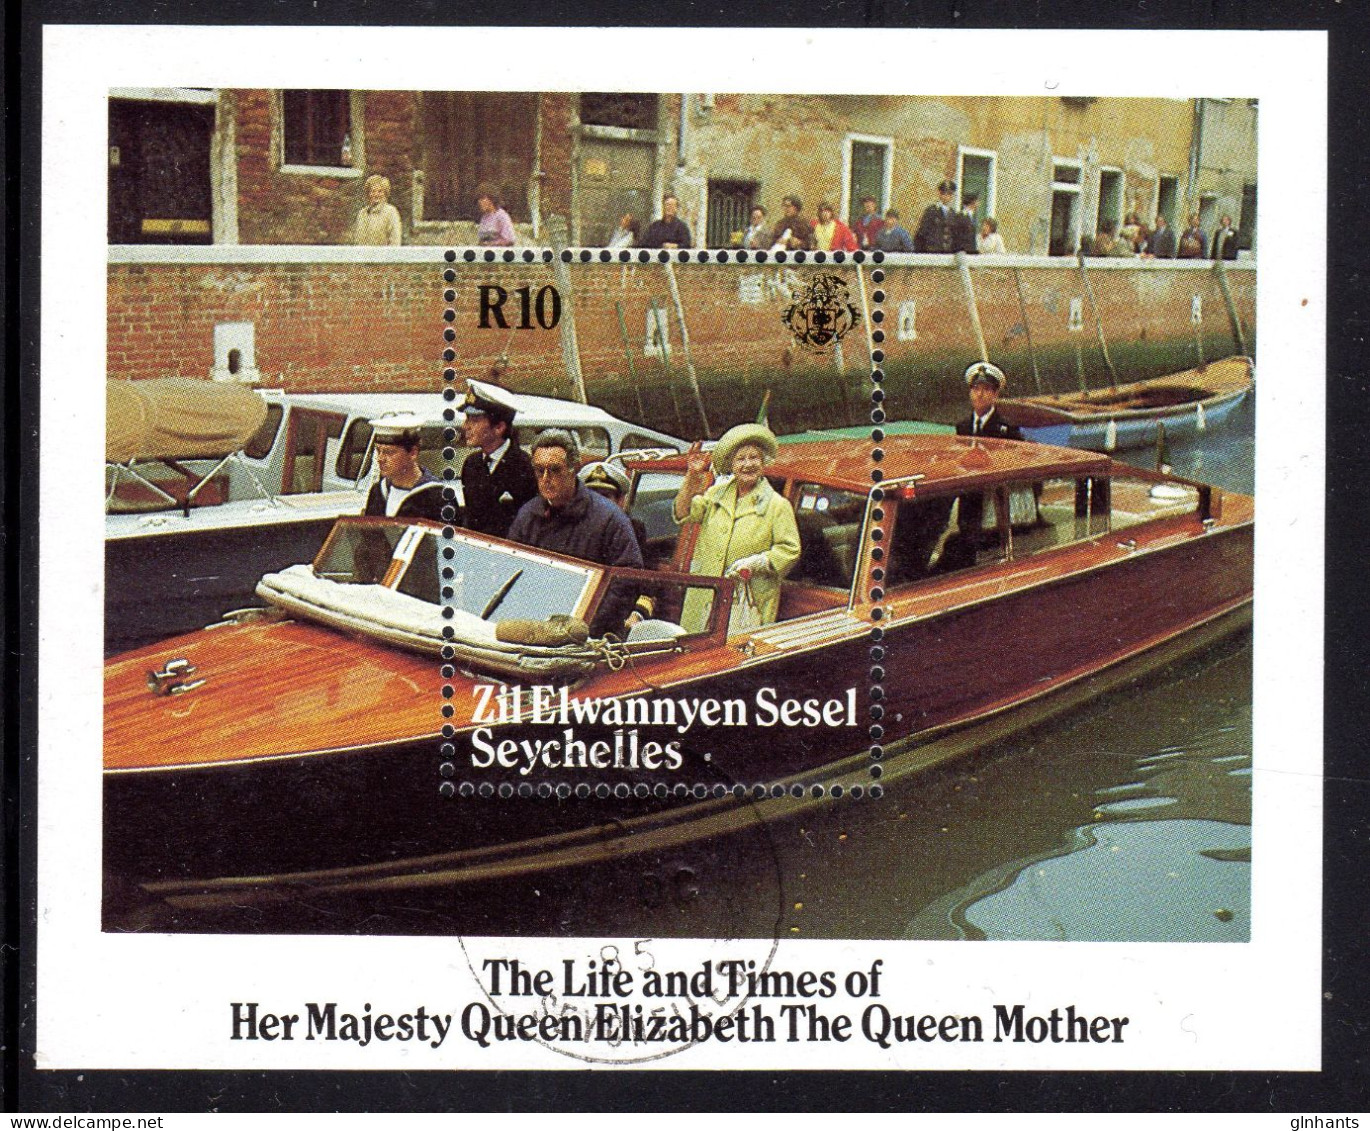 SEYCHELLES ZIL ELWANNYEN SESEL - 1985 LIFE & TIMES OF QUEEN MOTHER MS FINE USED SG MS119 - Seychelles (1976-...)